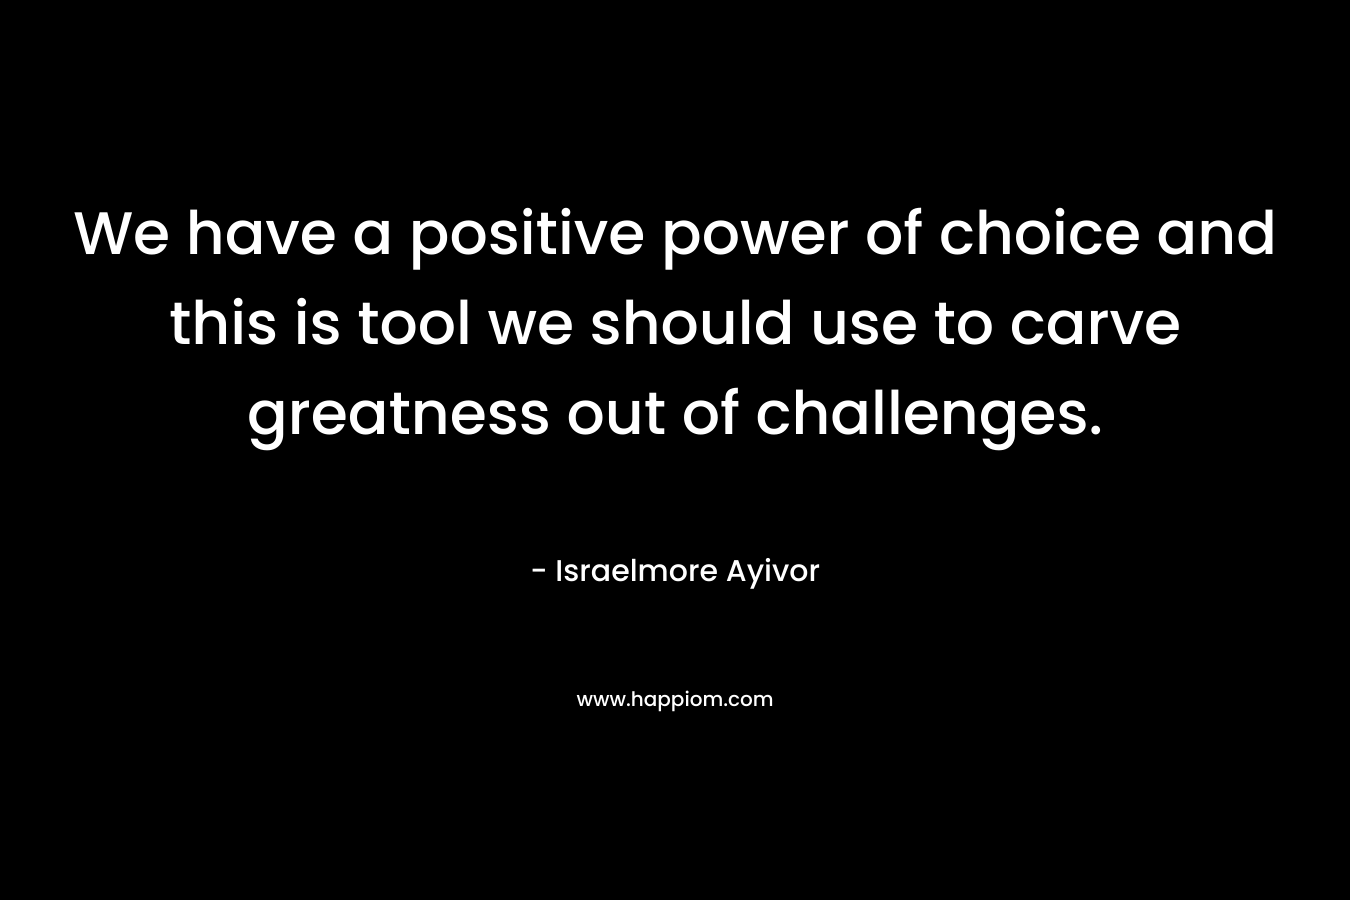 We have a positive power of choice and this is tool we should use to carve greatness out of challenges.